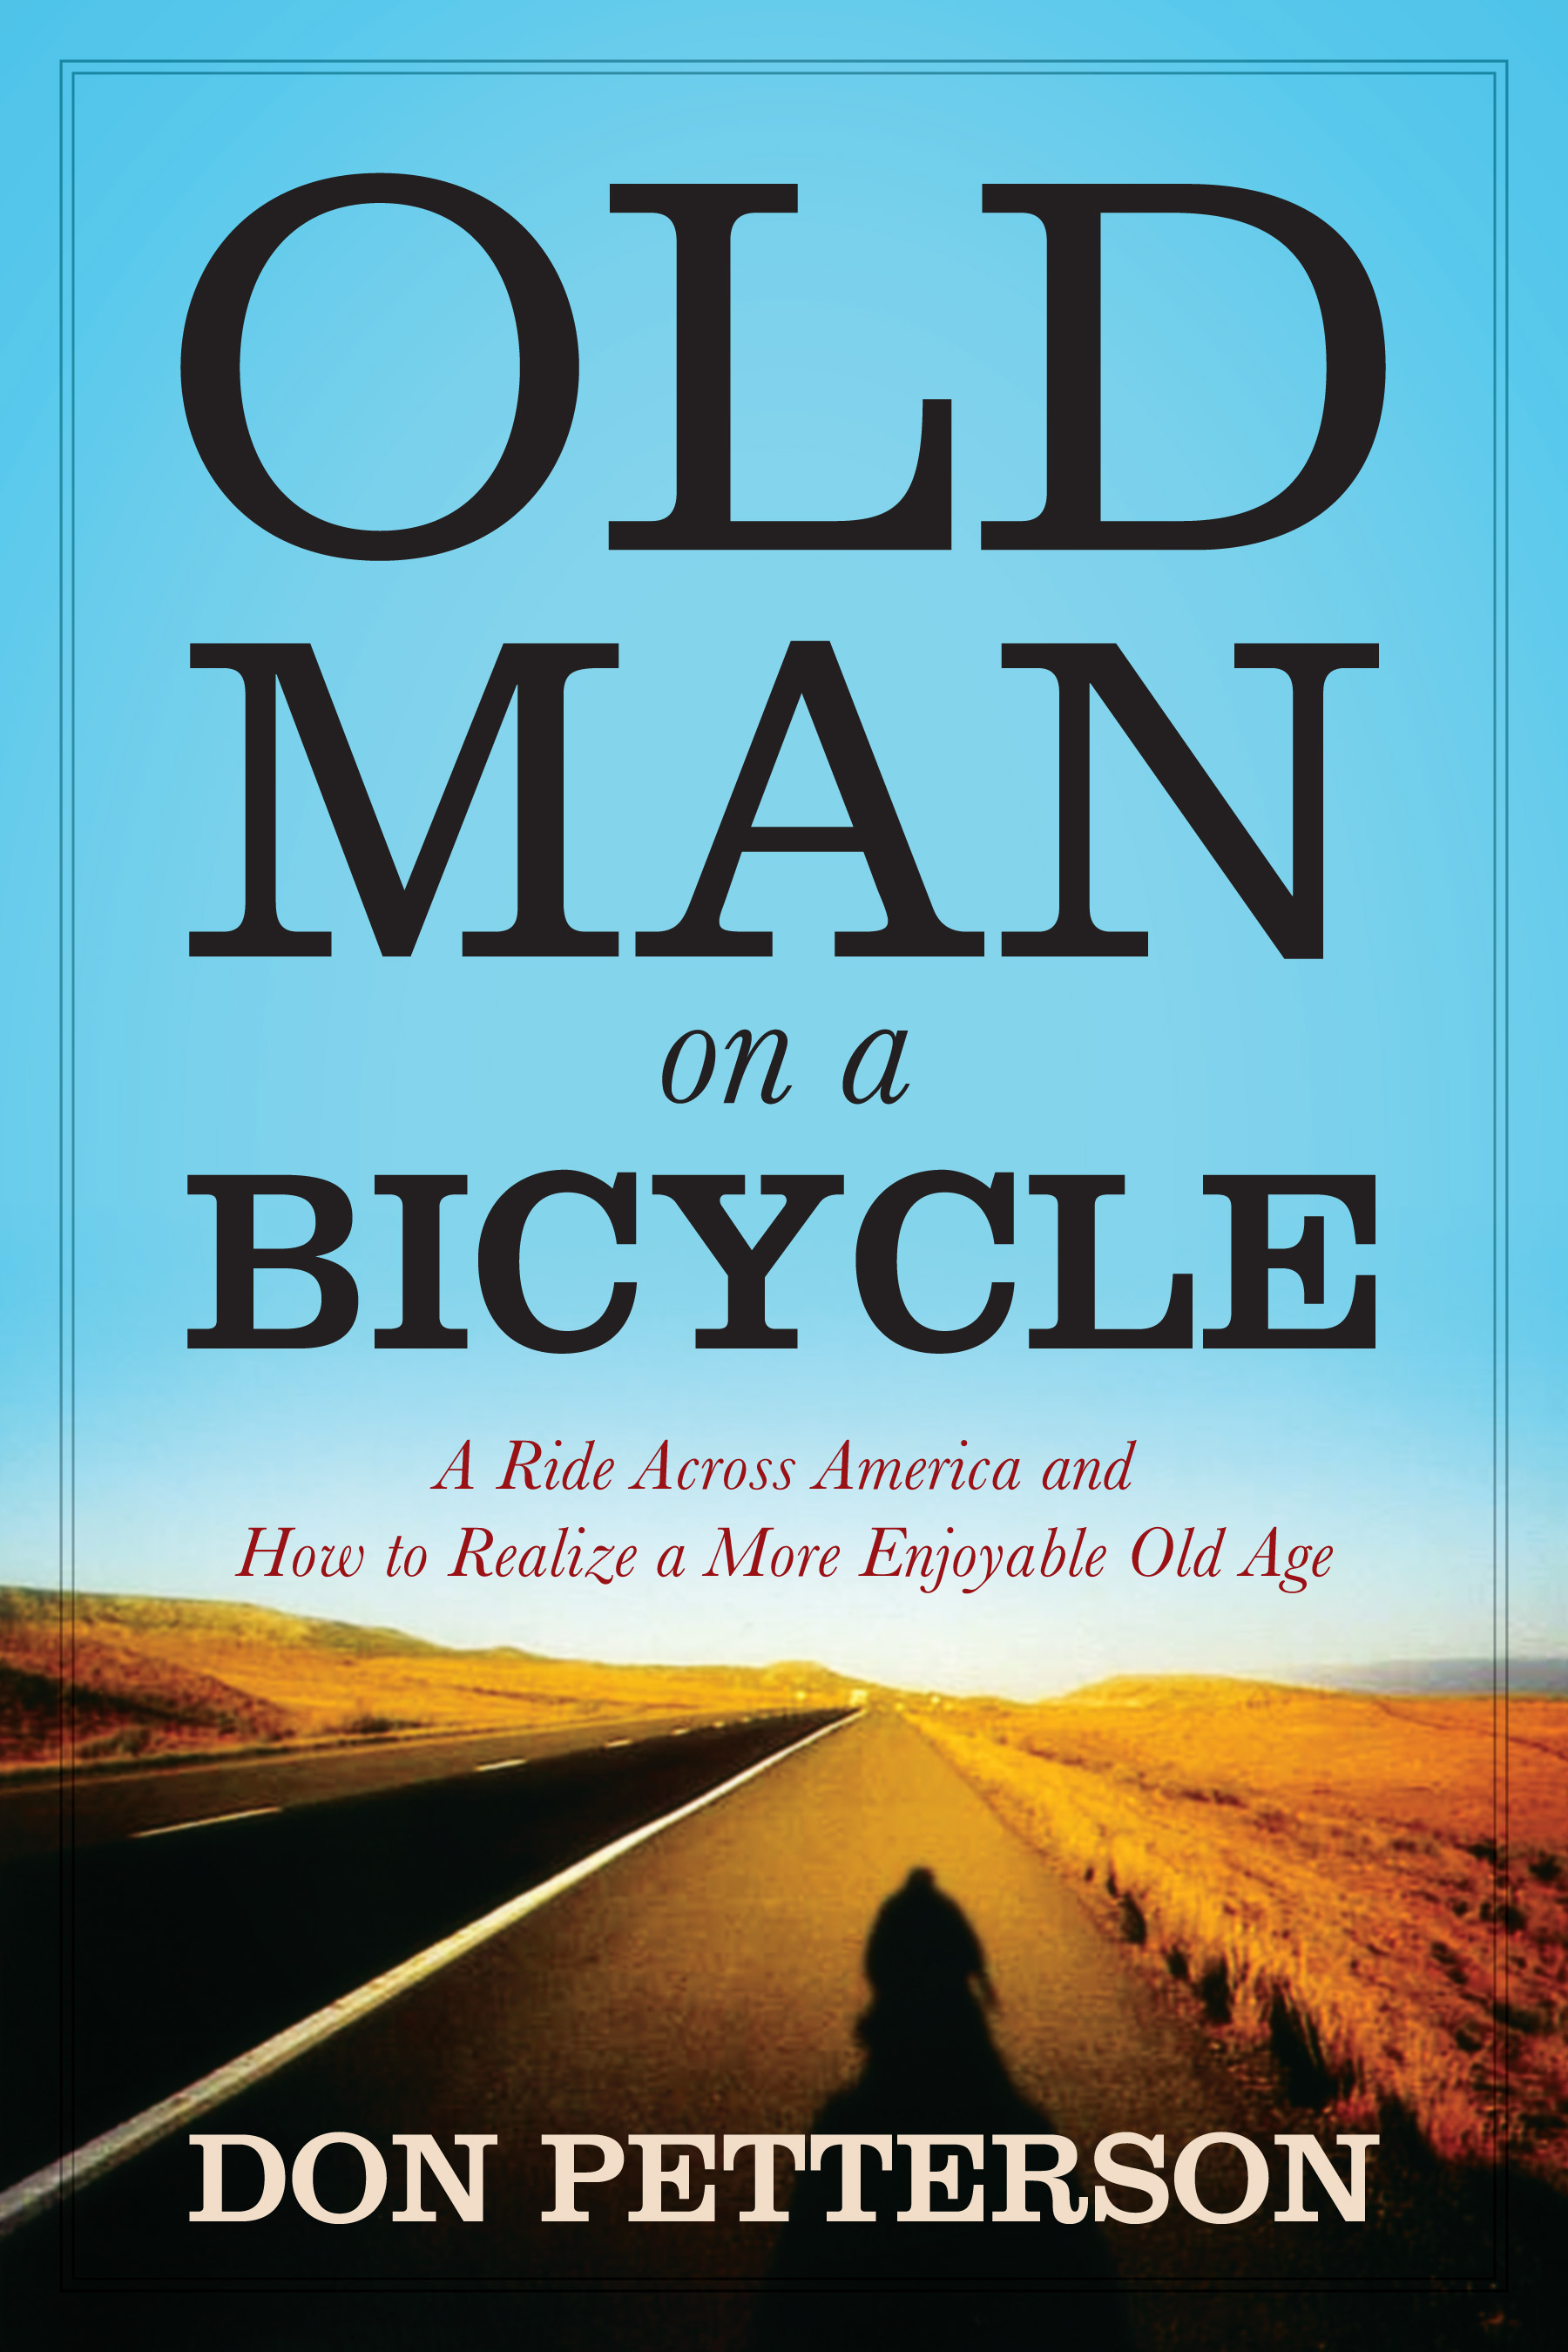 Self-published author Don Petterson’s book Old Man on a Bicycle published by Outskirts Press